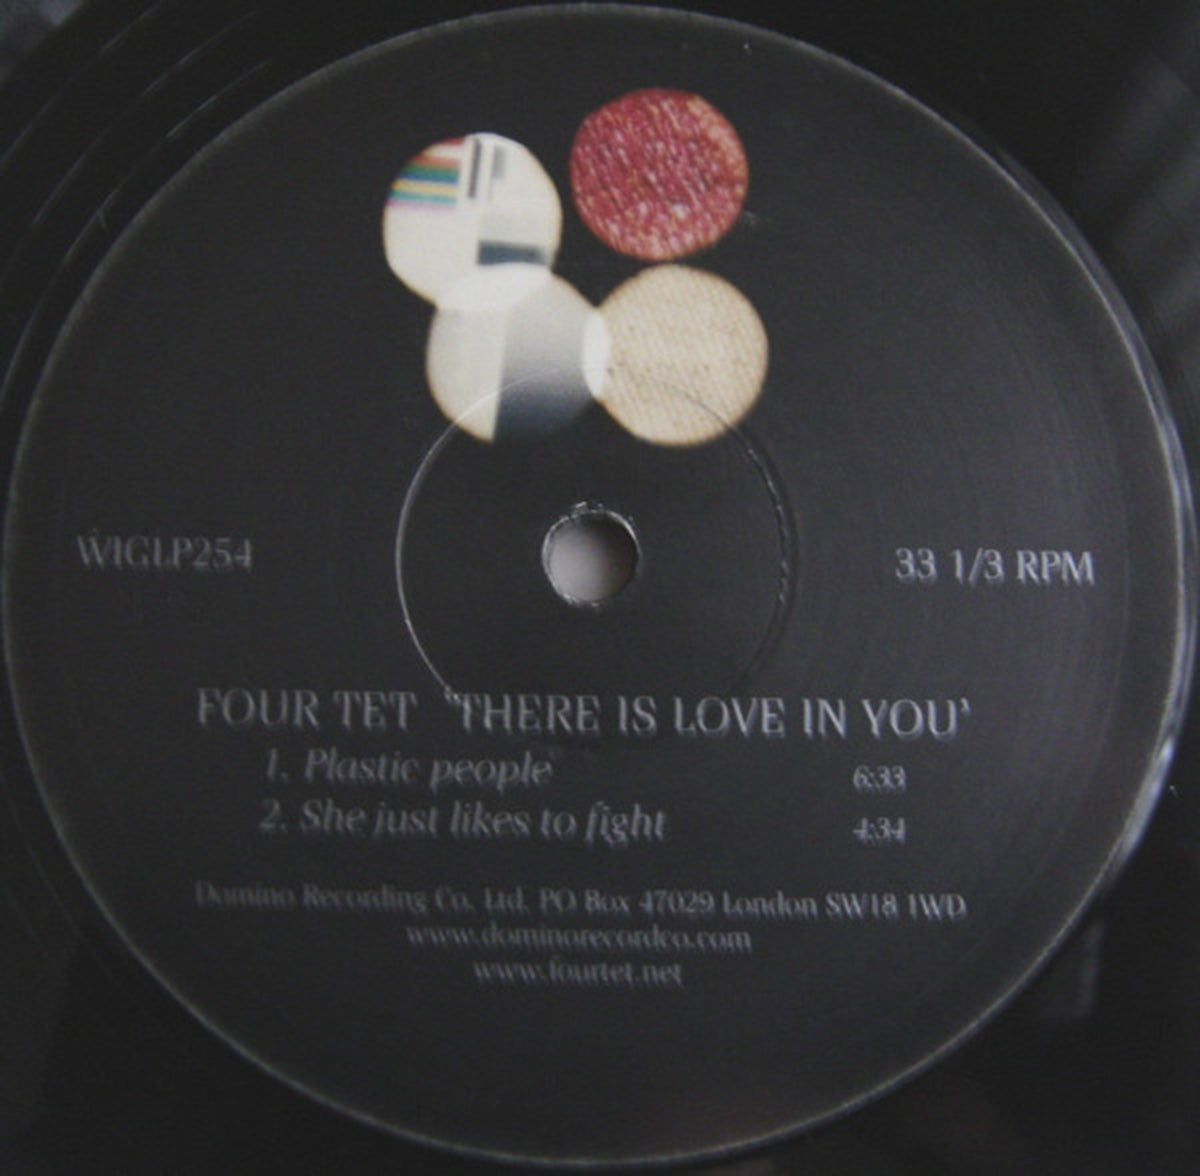 Four Tet – There Is Love In You - European Pressing